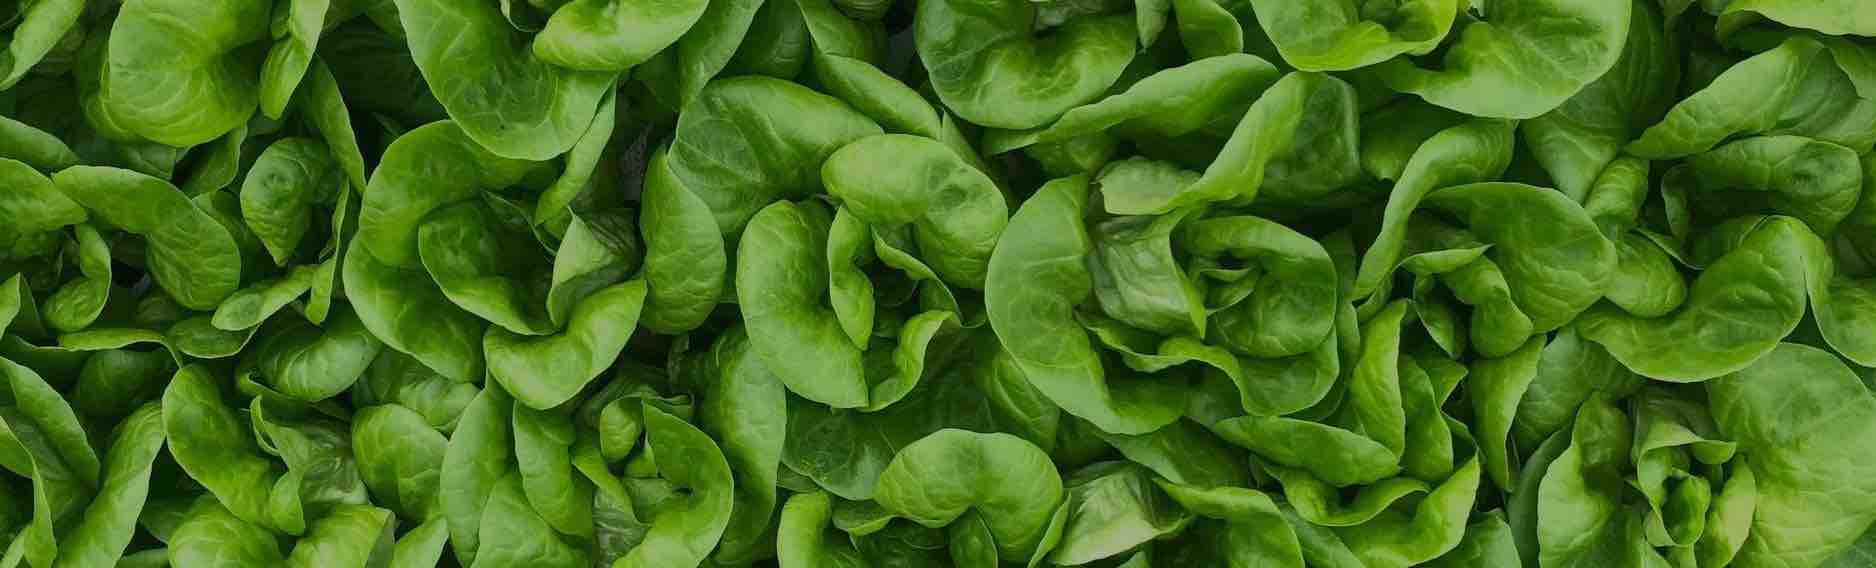 Image of lettuce grown at Huarache Farms